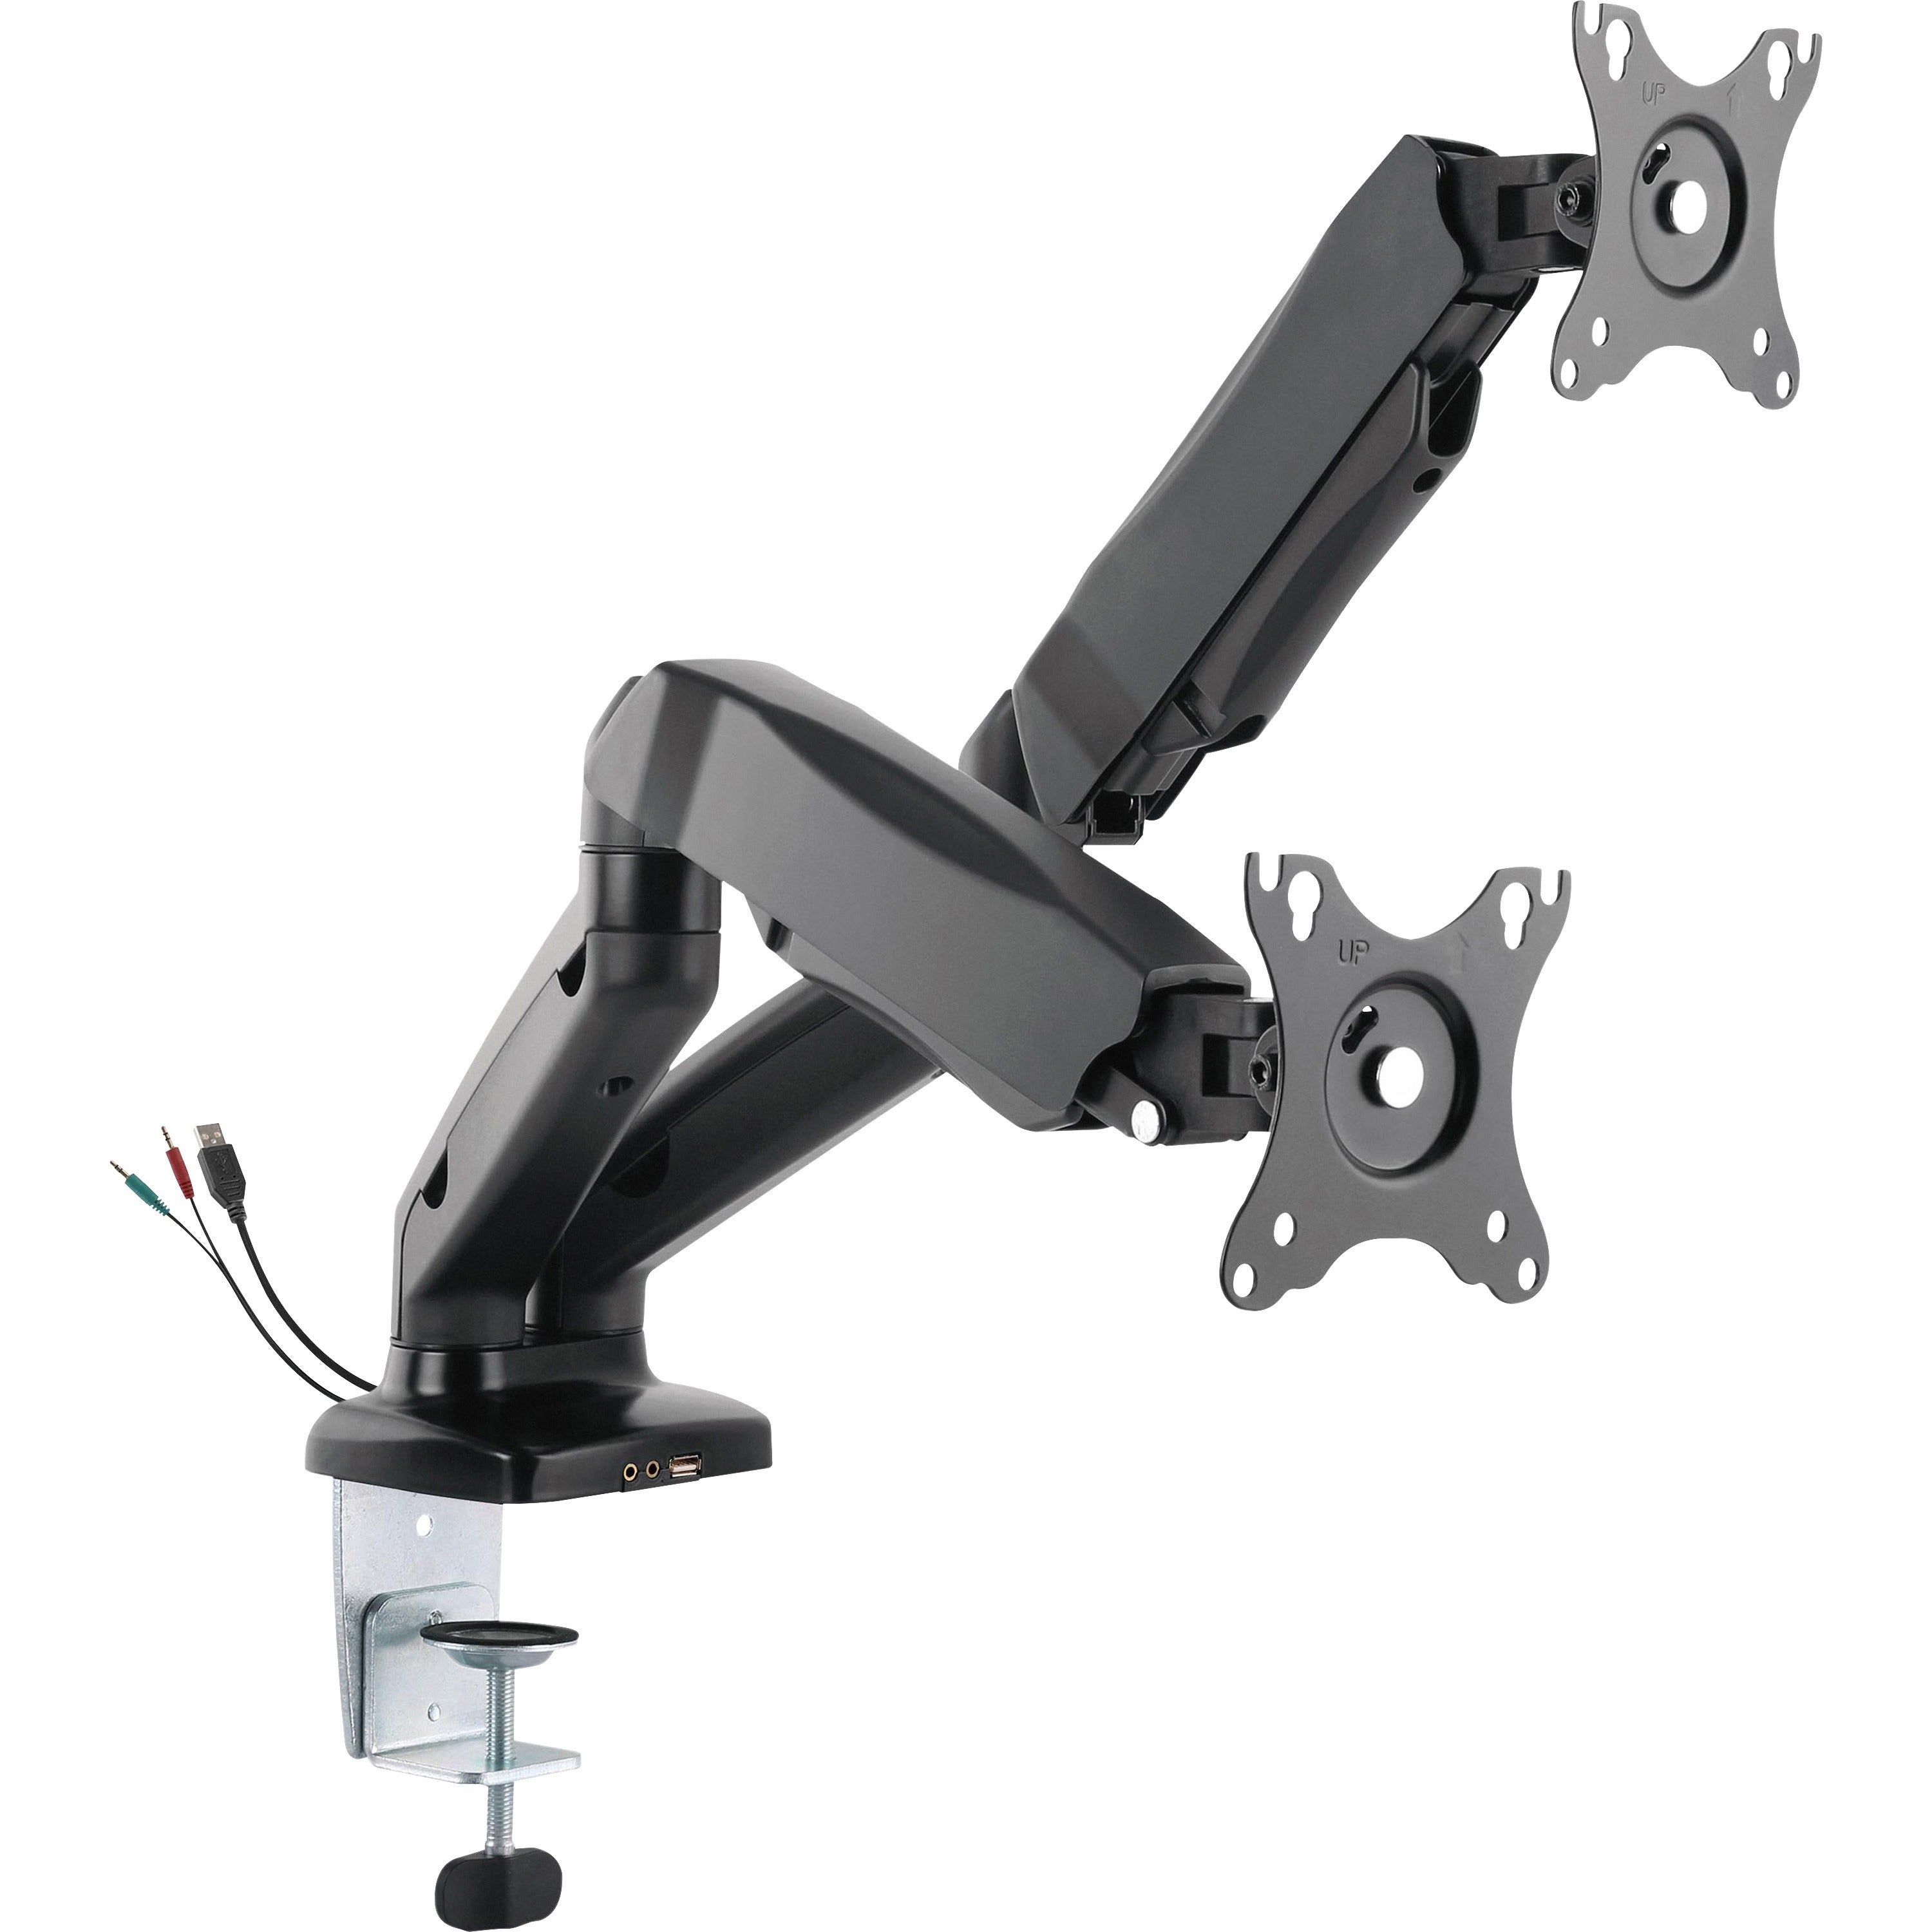 lorell-mounting-arm-for-monitor-black-height-adjustable-2-displays-supported-1430-lb-load-capacity-75-x-75-100-x-100-1-each_llr99801 - 1